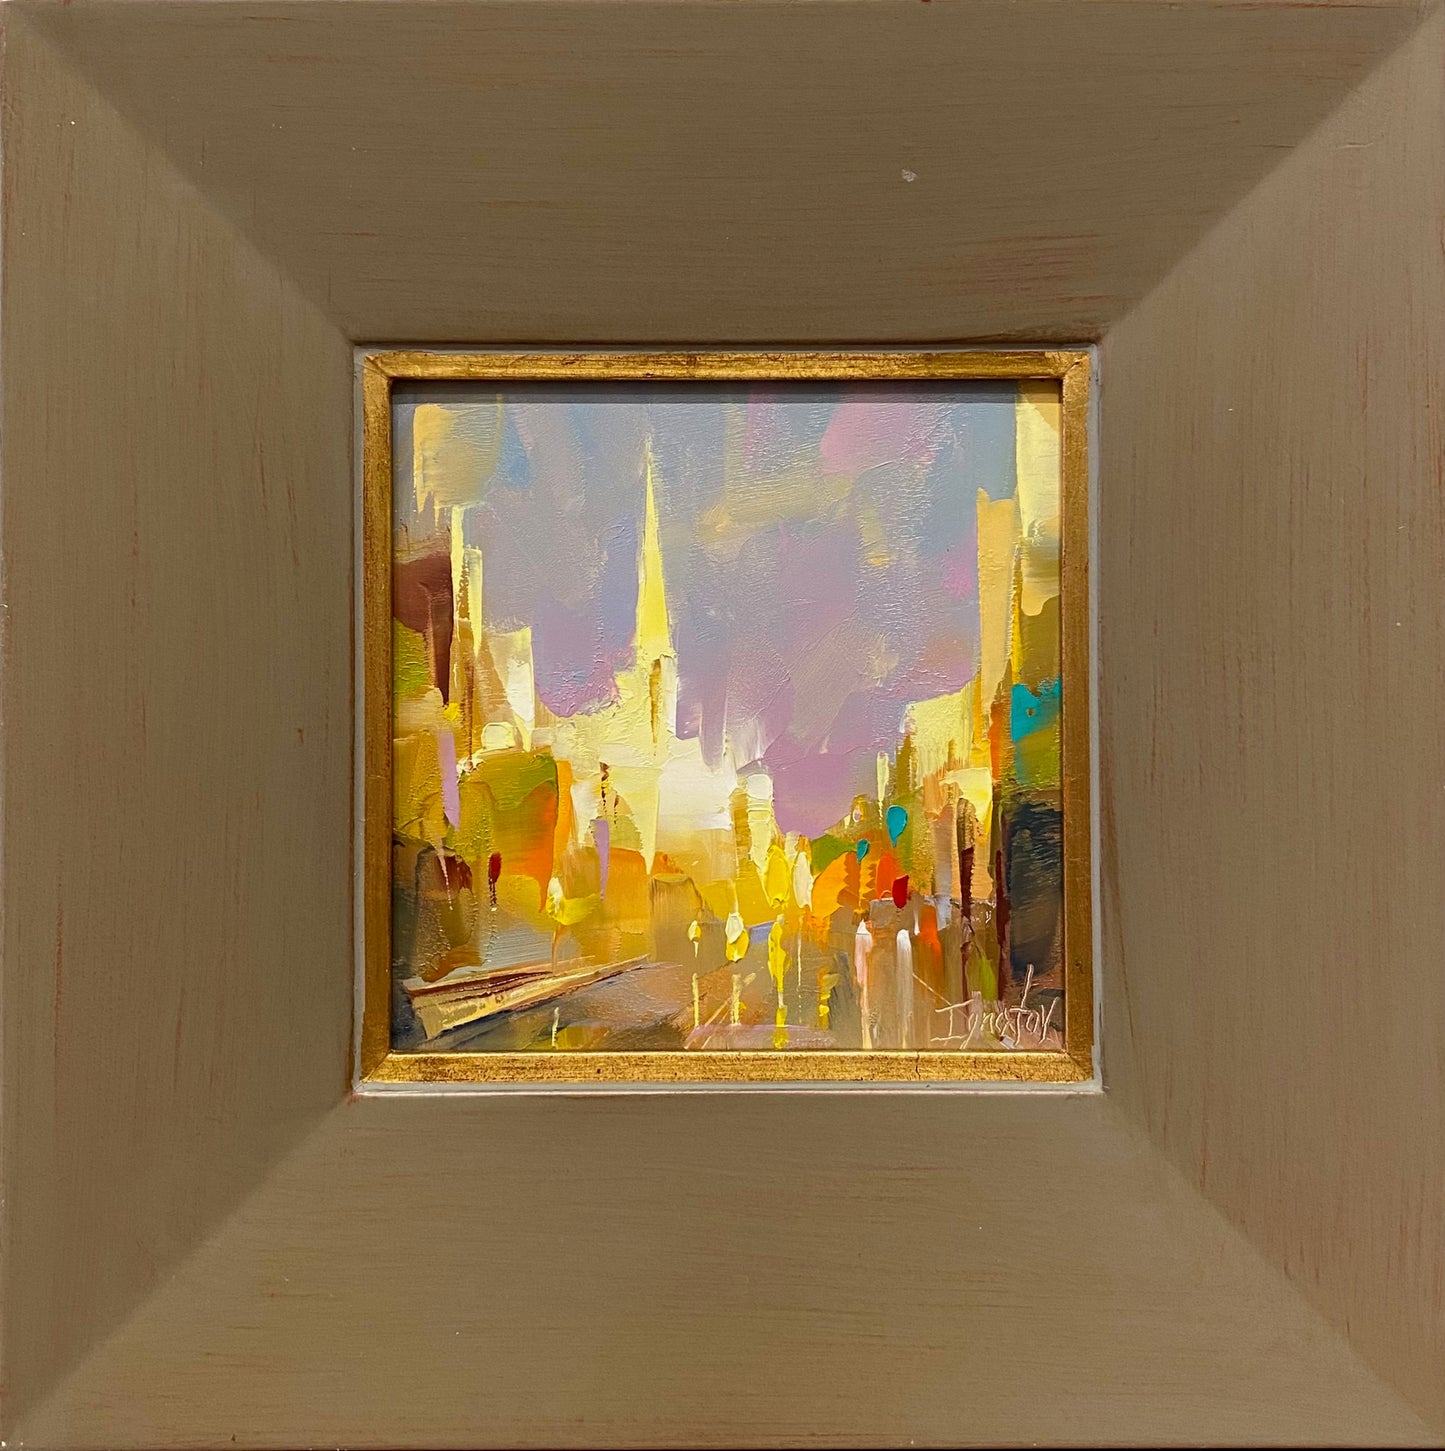 Downtown Evening, study by Ignat Ignatov at LePrince Galleries